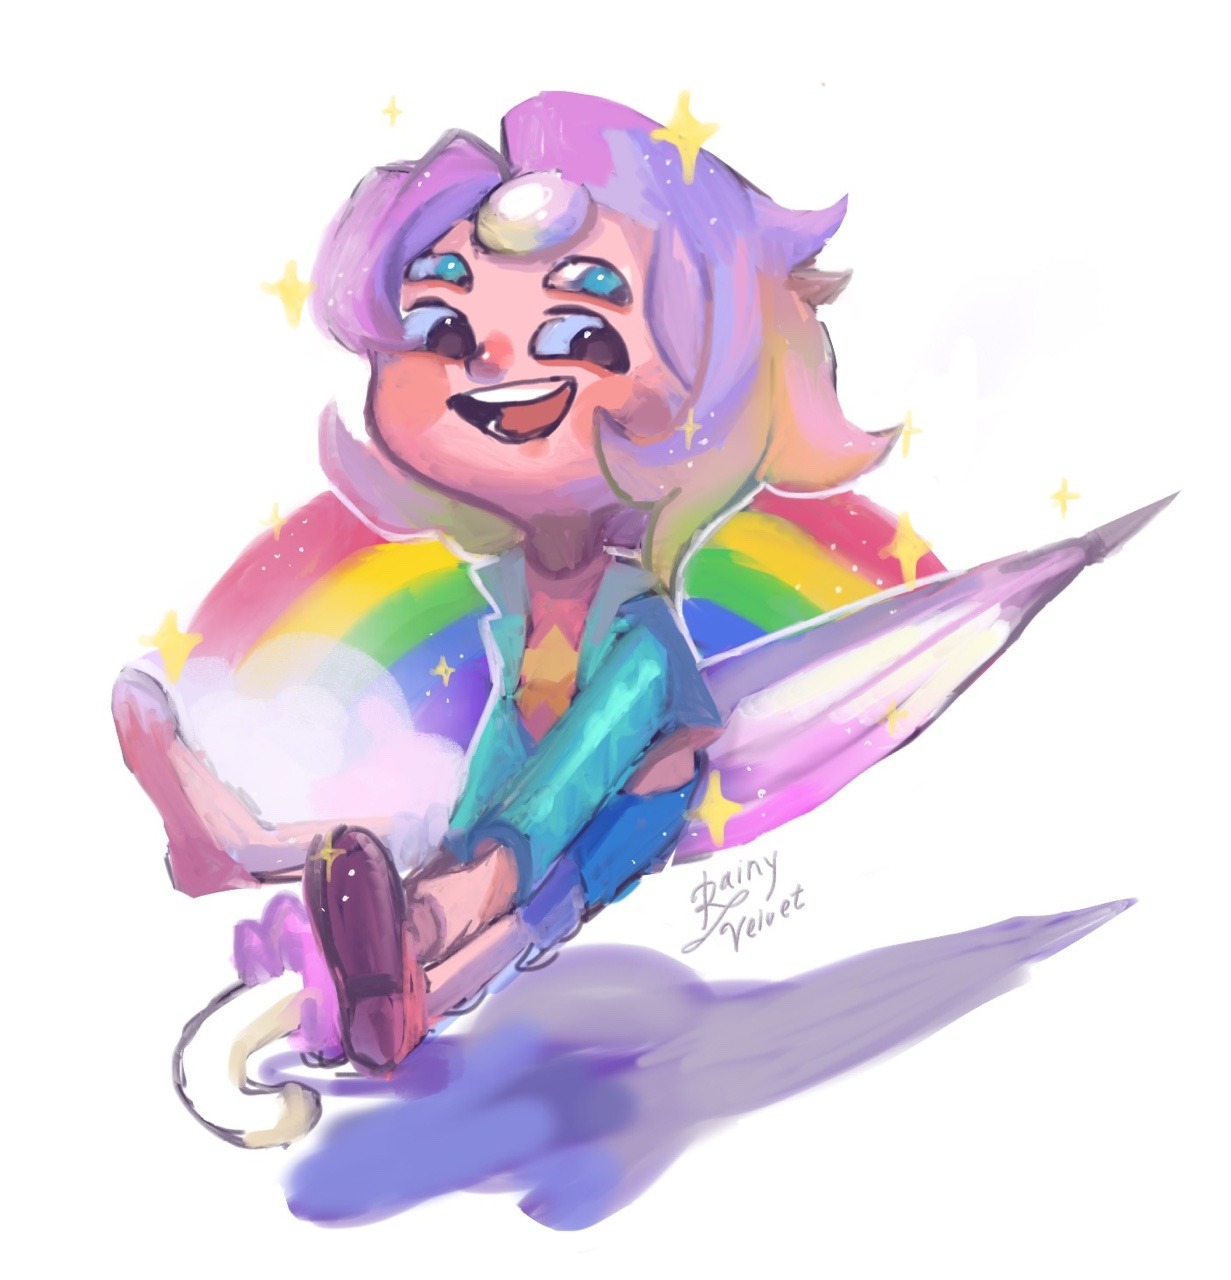 Rainbow Quartz 2.0!! Aaaah i waited sooo long to see this version! T_____T The hype is intense